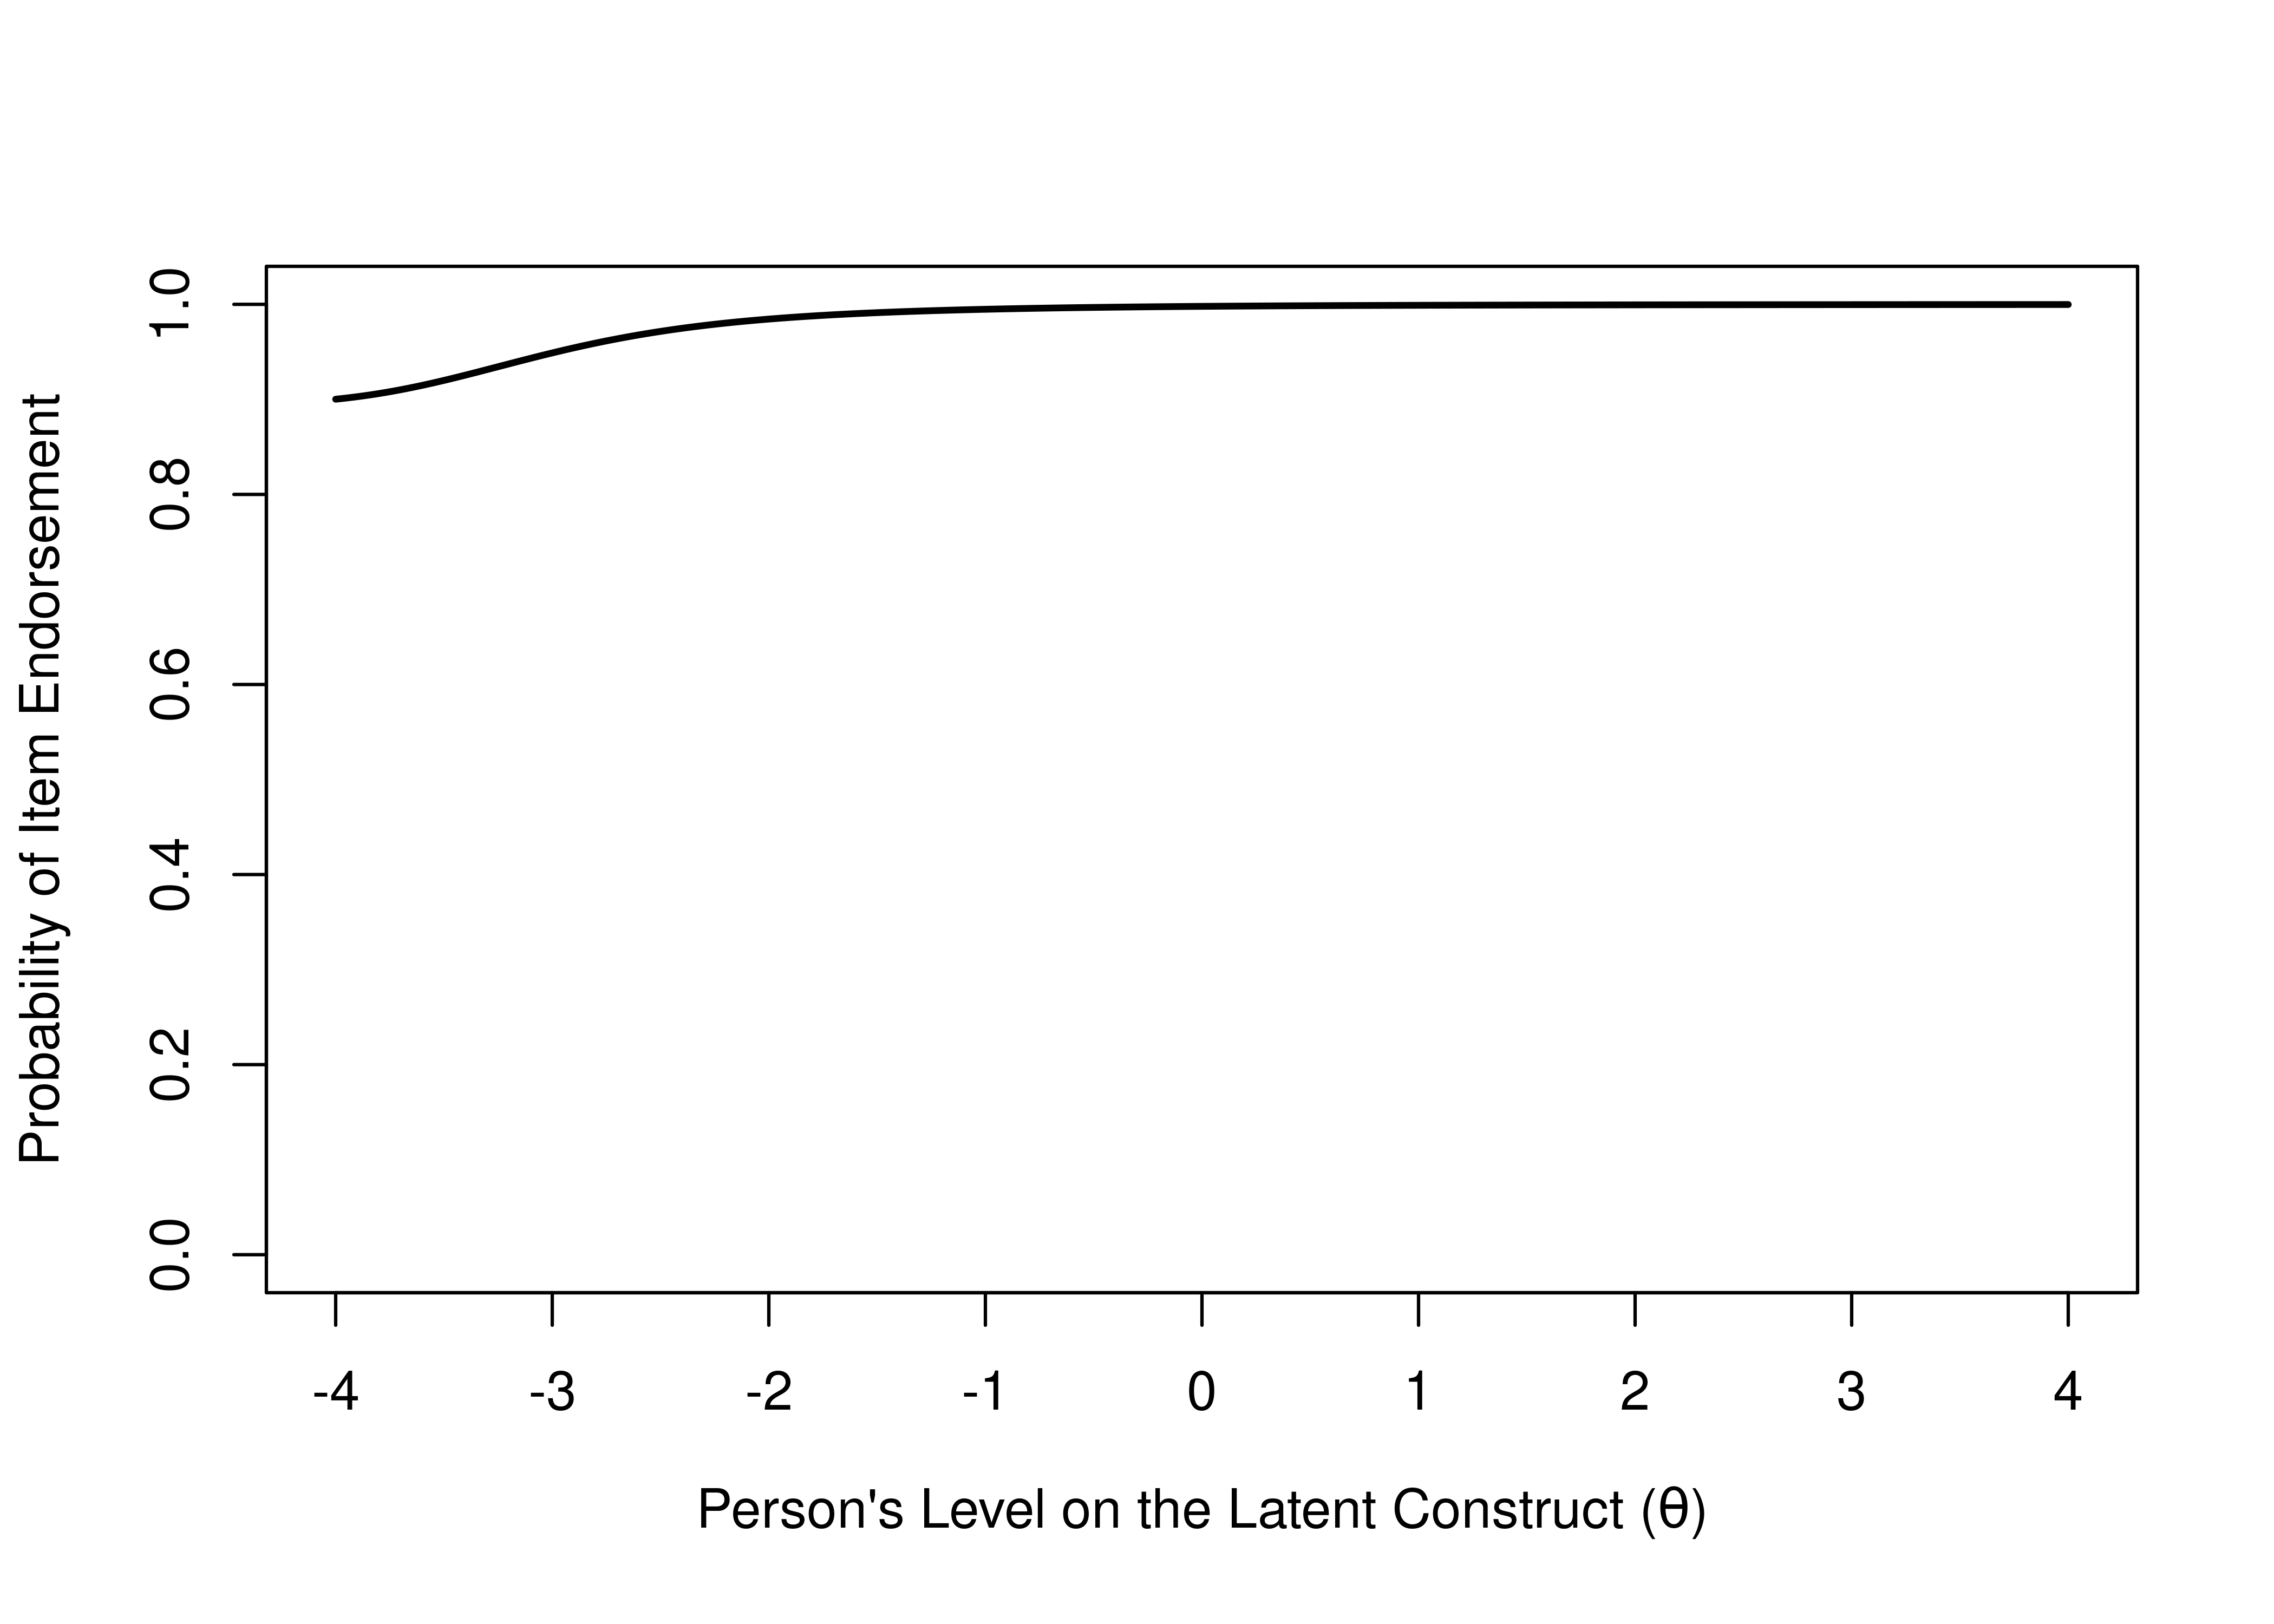 Item Characteristic Curve of an Item with a Ceiling Effect That is not Diagnostically Useful.